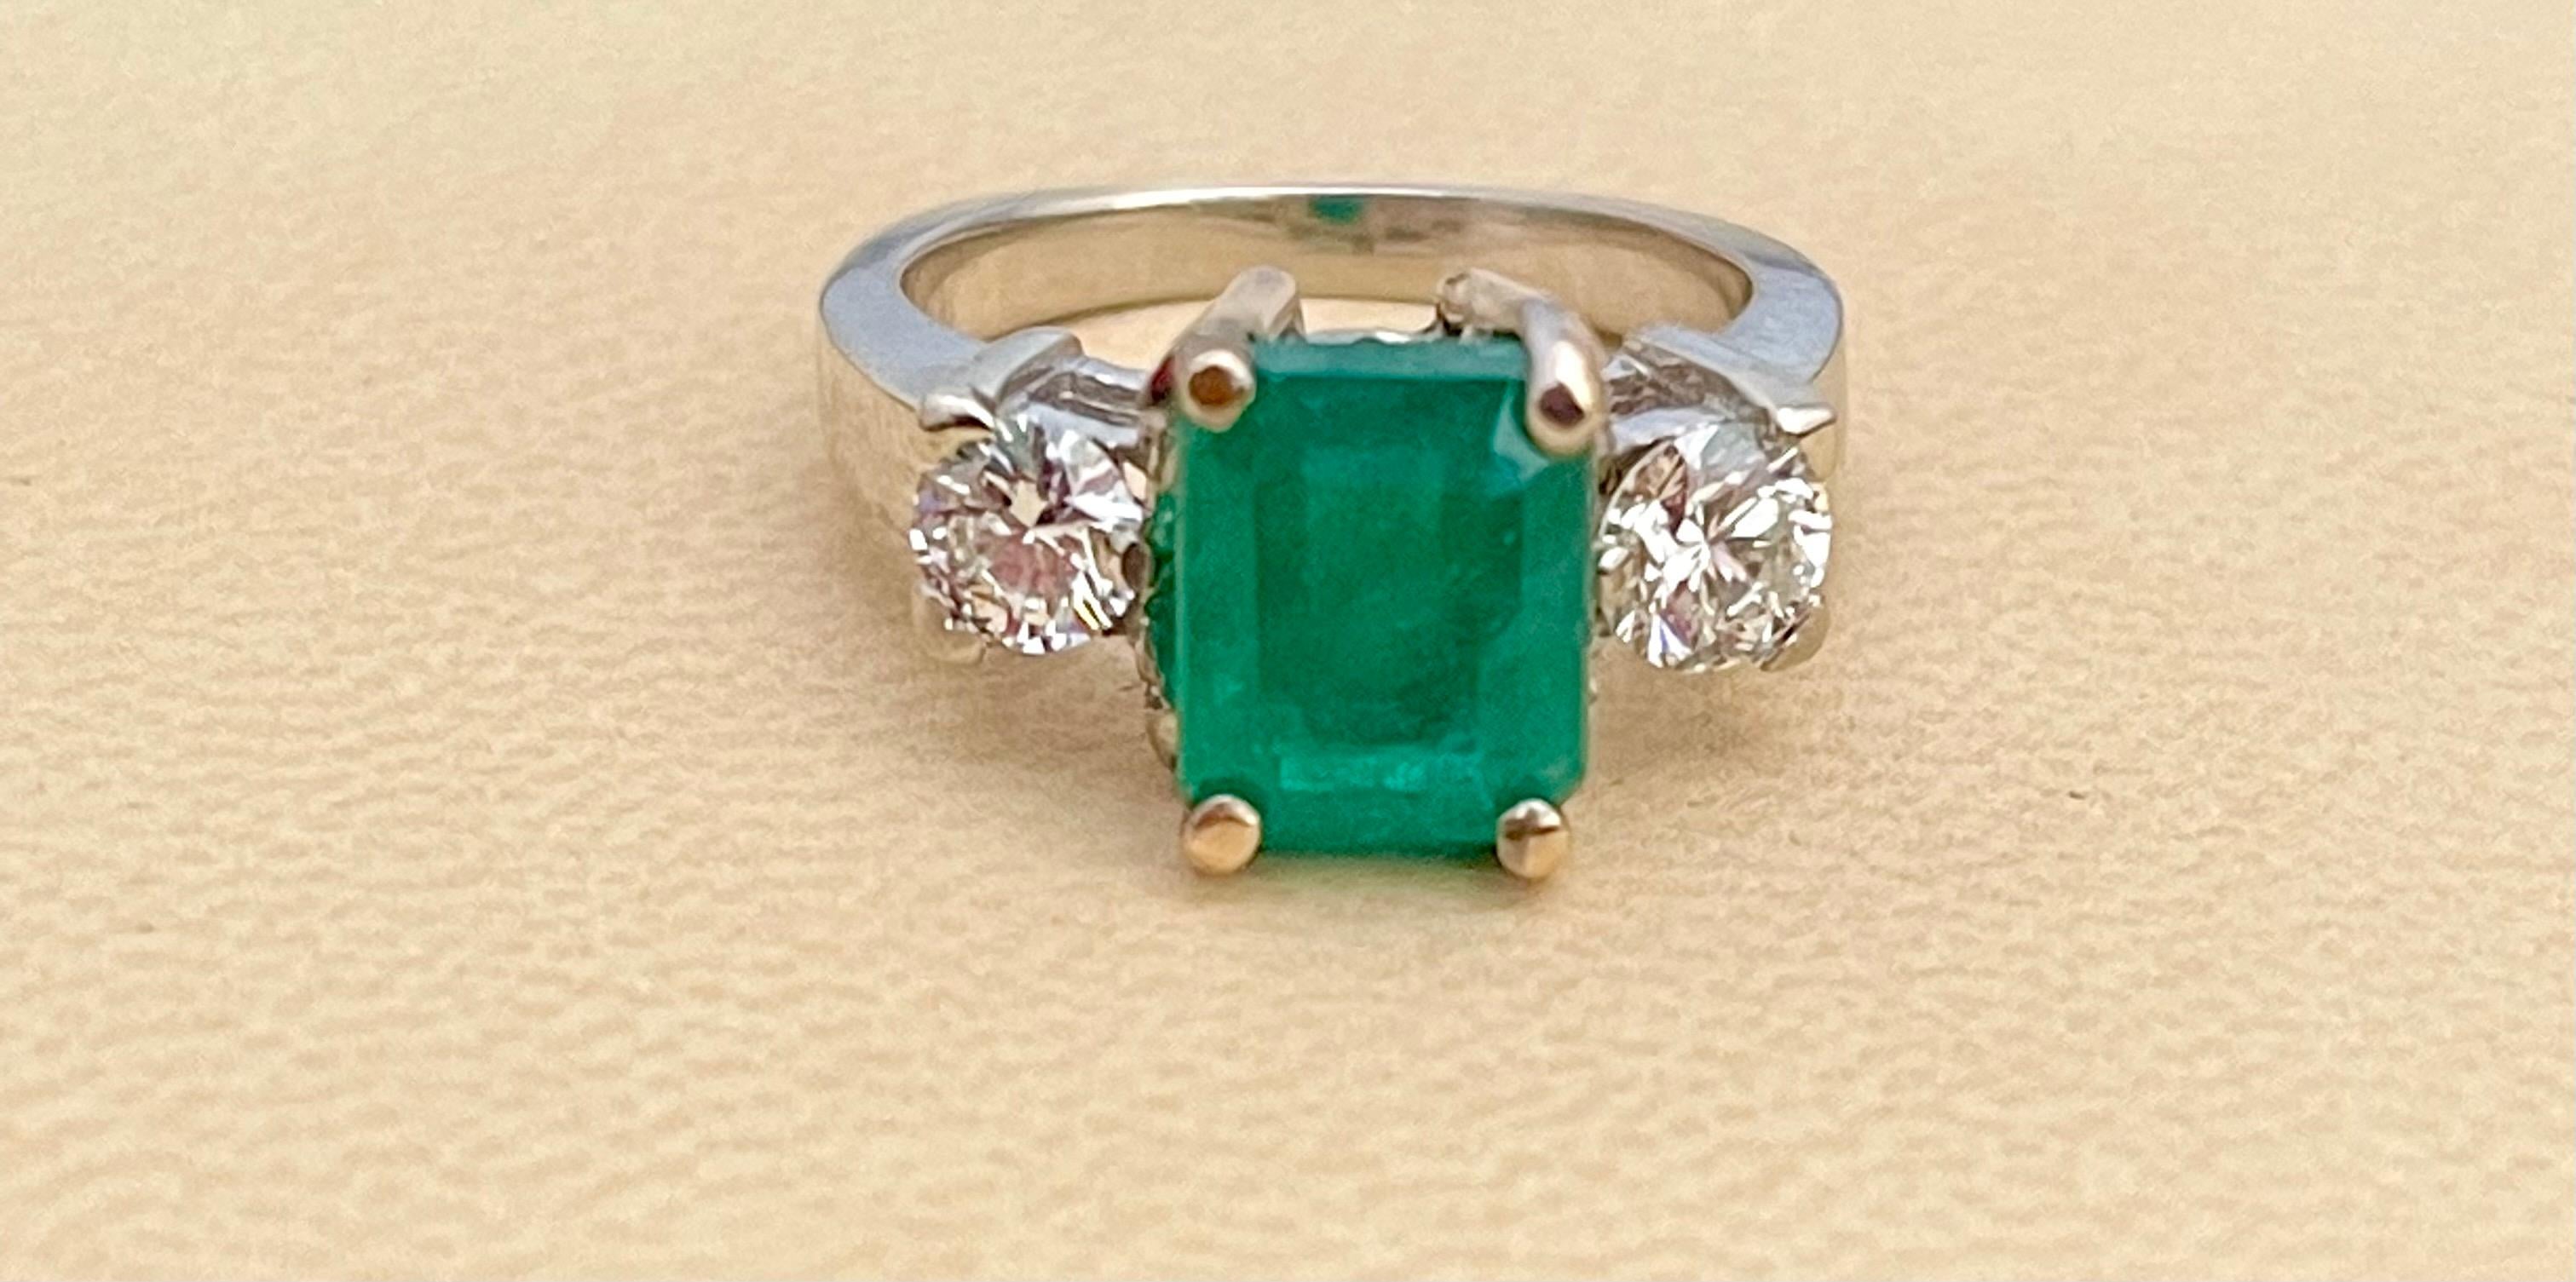 A classic,  ring 
 2.5  Carat Natural Emerald  Cut Emerald & Diamond Ring 14 Karat White Gold Size 6
Intense green color, Beautiful stone with shine and luster  but has small  inclusions as all natural emeralds have inclusions.  
They have black